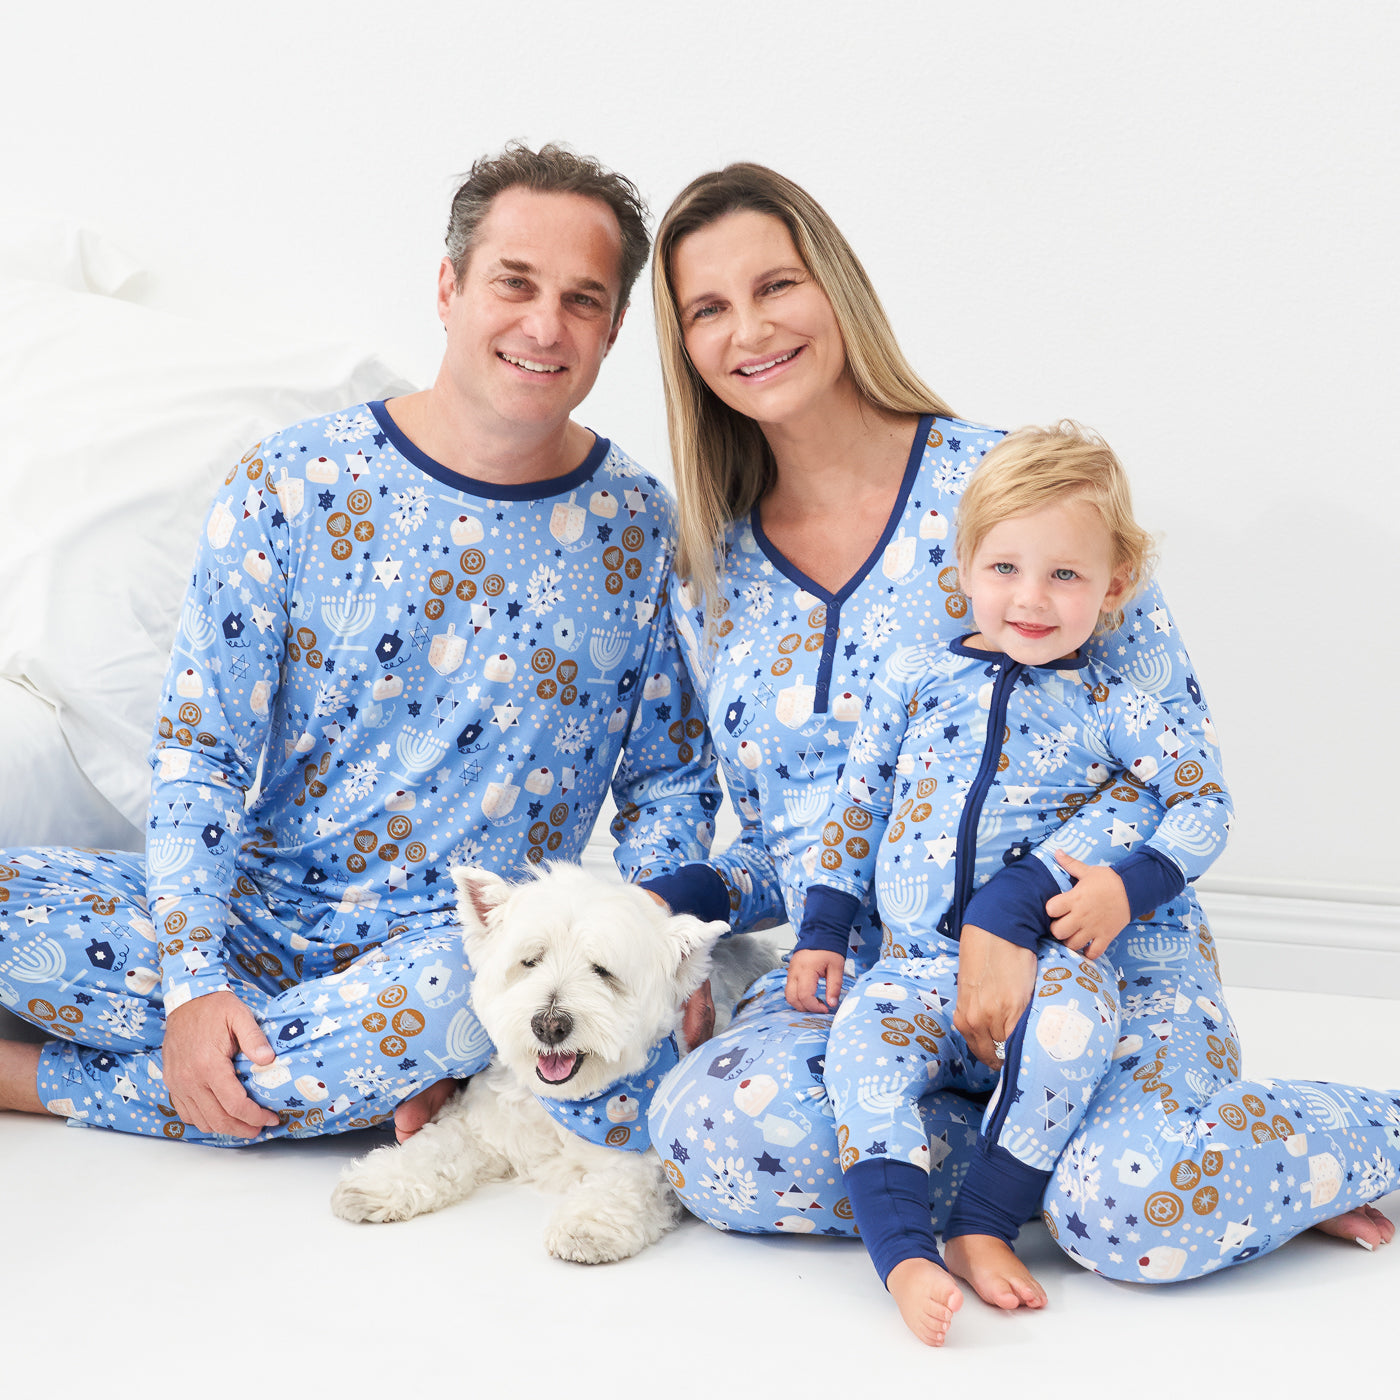 Family of three posing together wearing Hanukkah Lights and Love pajama sets. Dad is wearing a Hanukkah Lights and Love men's pajama top and matching men's pajama bottoms. Mom is wearing Hanukkah Lights and Love women's pajama top and matching pajama bottoms. Child is wearing a Hanukkah Lights and Love zippy and their dog is wearing a Hanukkah Lights and Love pet bandana